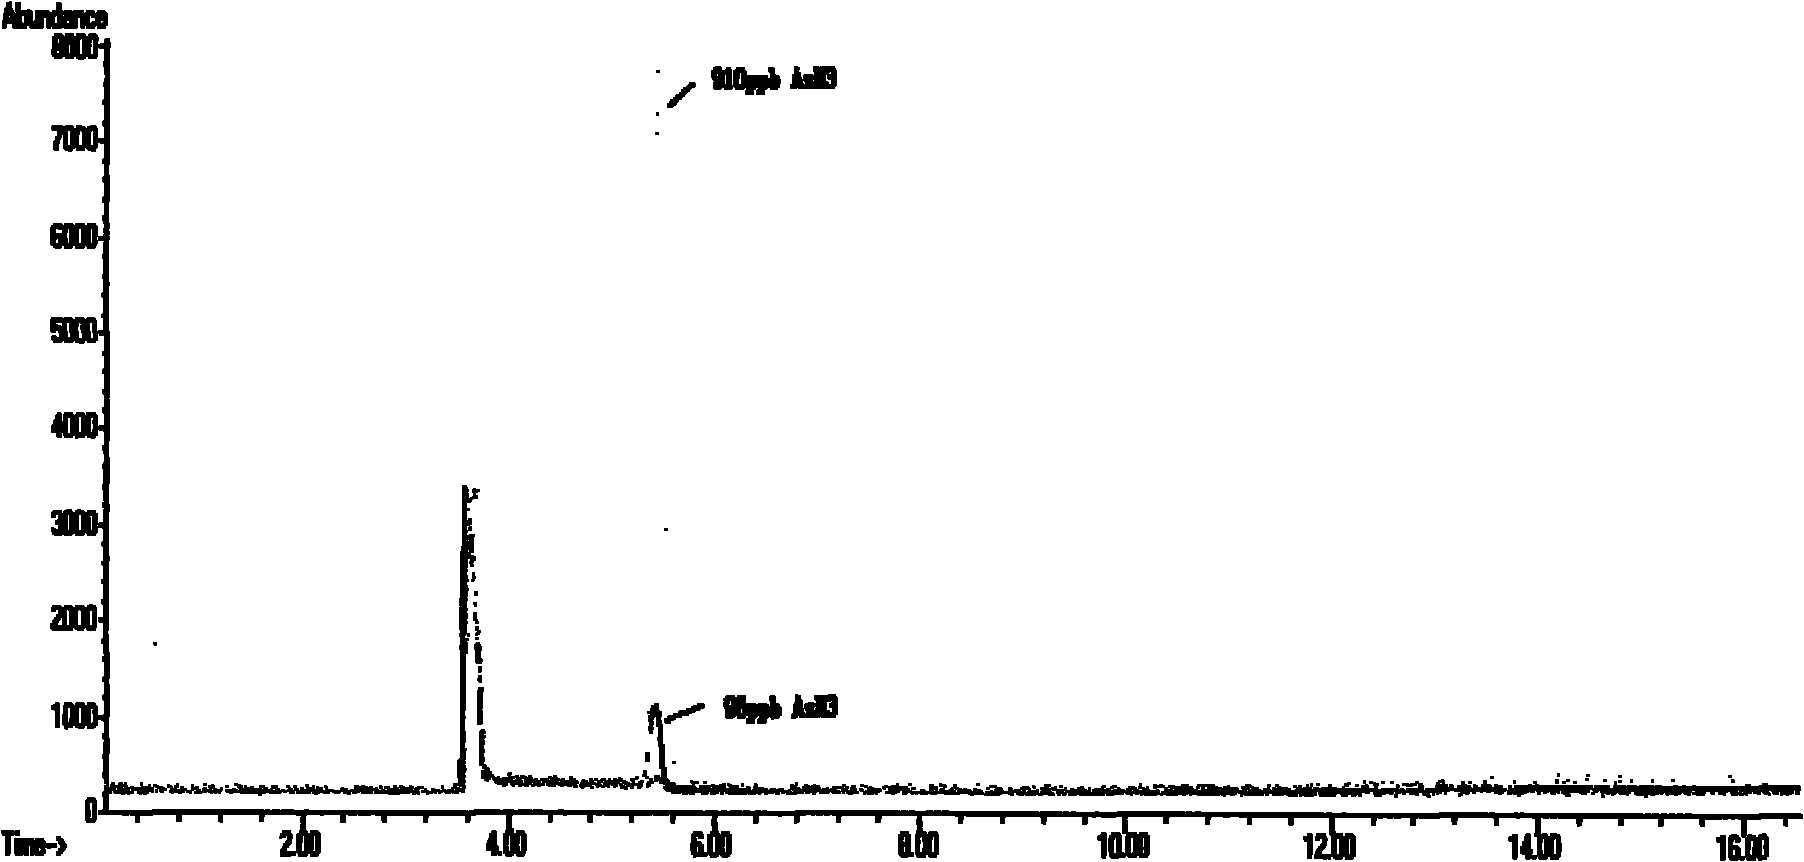 Copper salt absorption liquid for desorbing arsenic hydride from ethane and propene in gas phase and application thereof